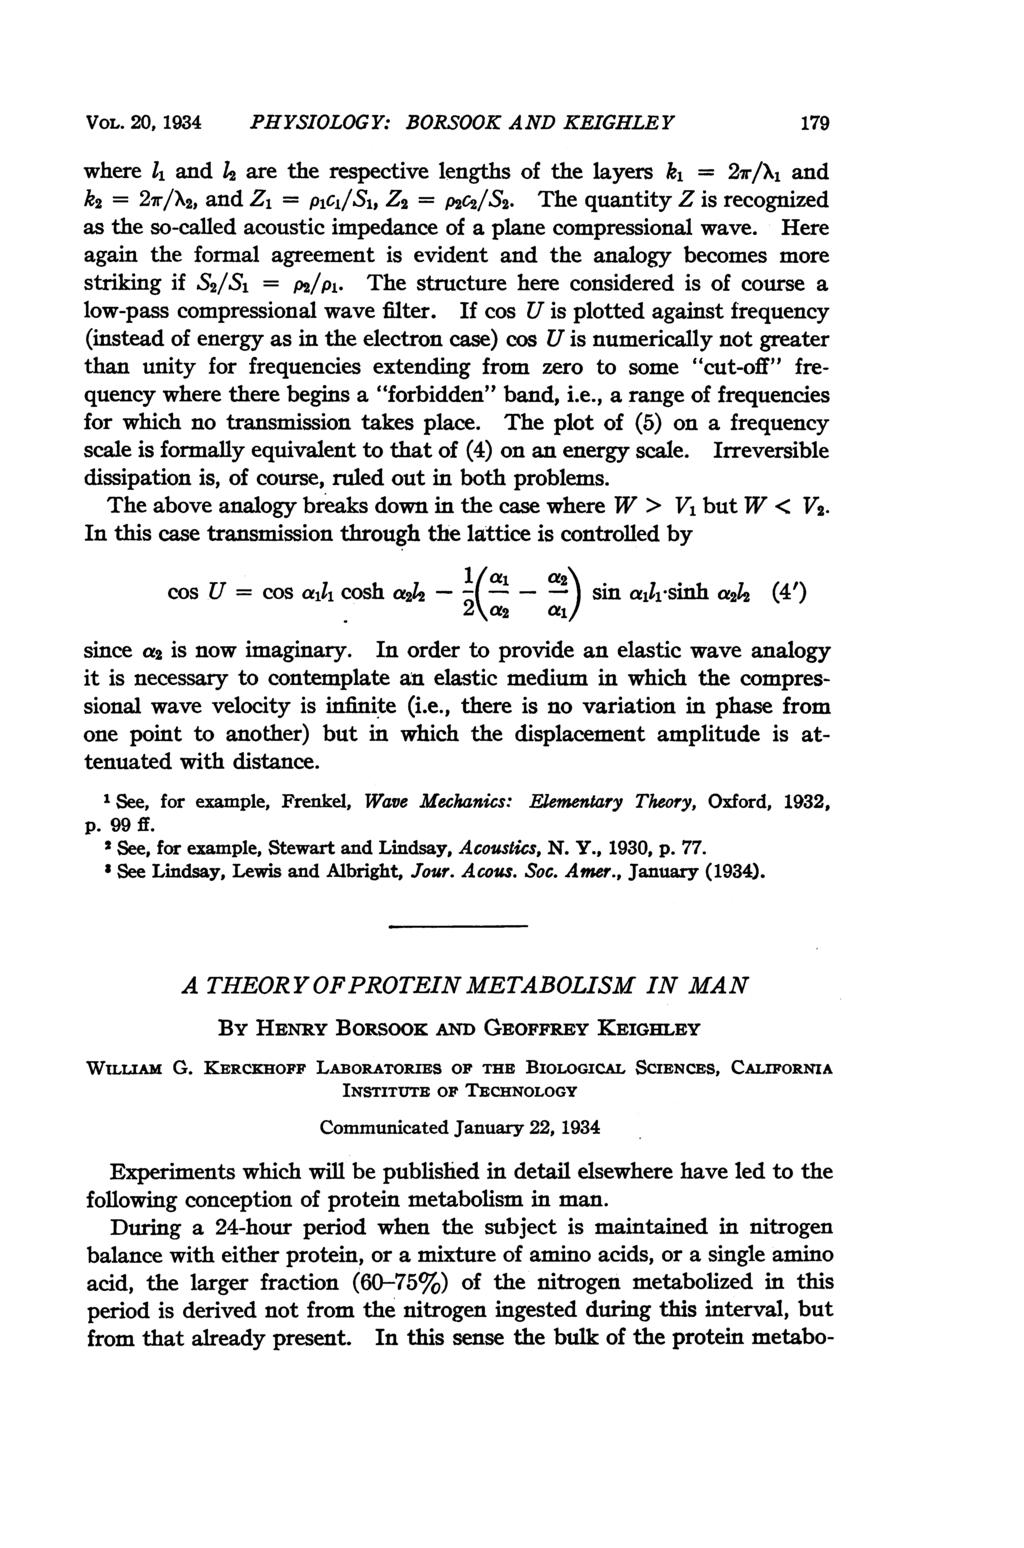 VOL. 20, 1934 PHYSIOLOGY: BORSOOK AND KEIGHLEY 179 where 11 and 14 are the respective lengths of the layers k1 = 27r/Xi and k2= 27r/X2, and Z1 = pici/si, Z2 = P2C2/S2.